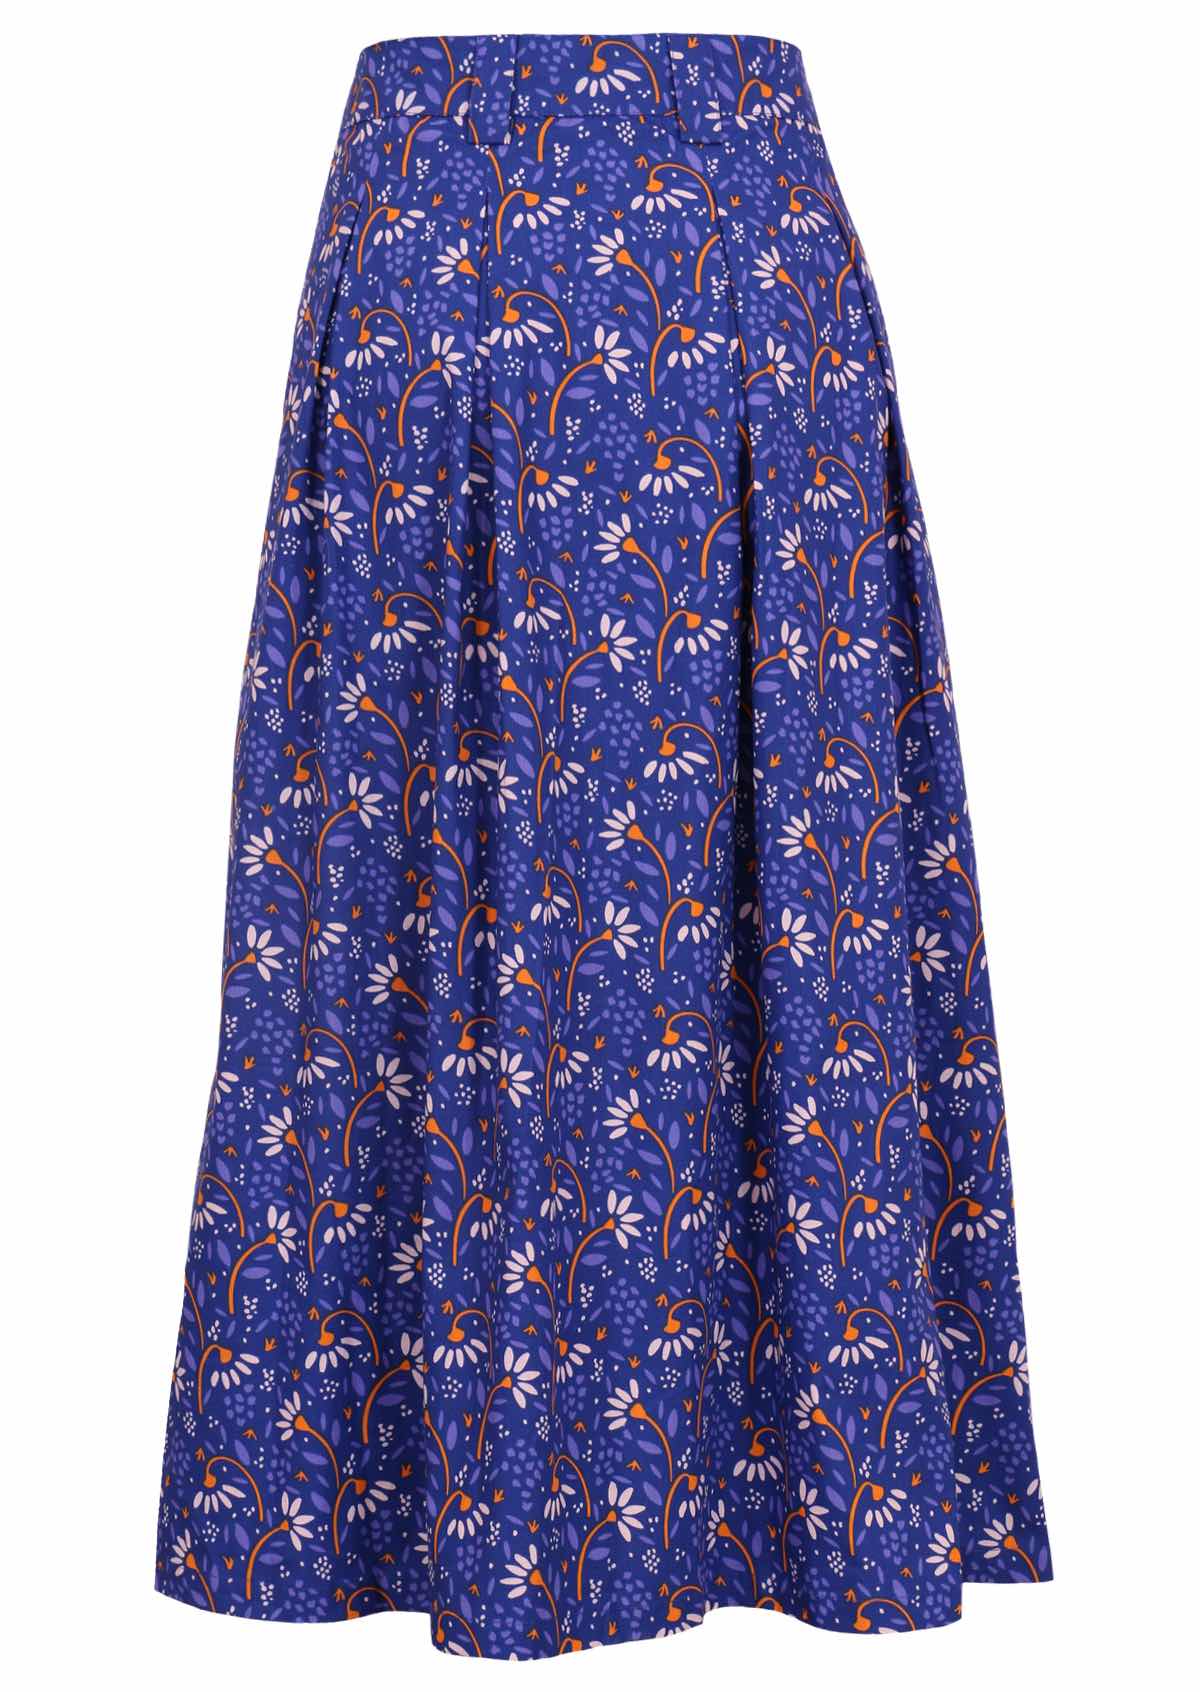 Blue based skirt is made from 100% cotton and has box pleats.